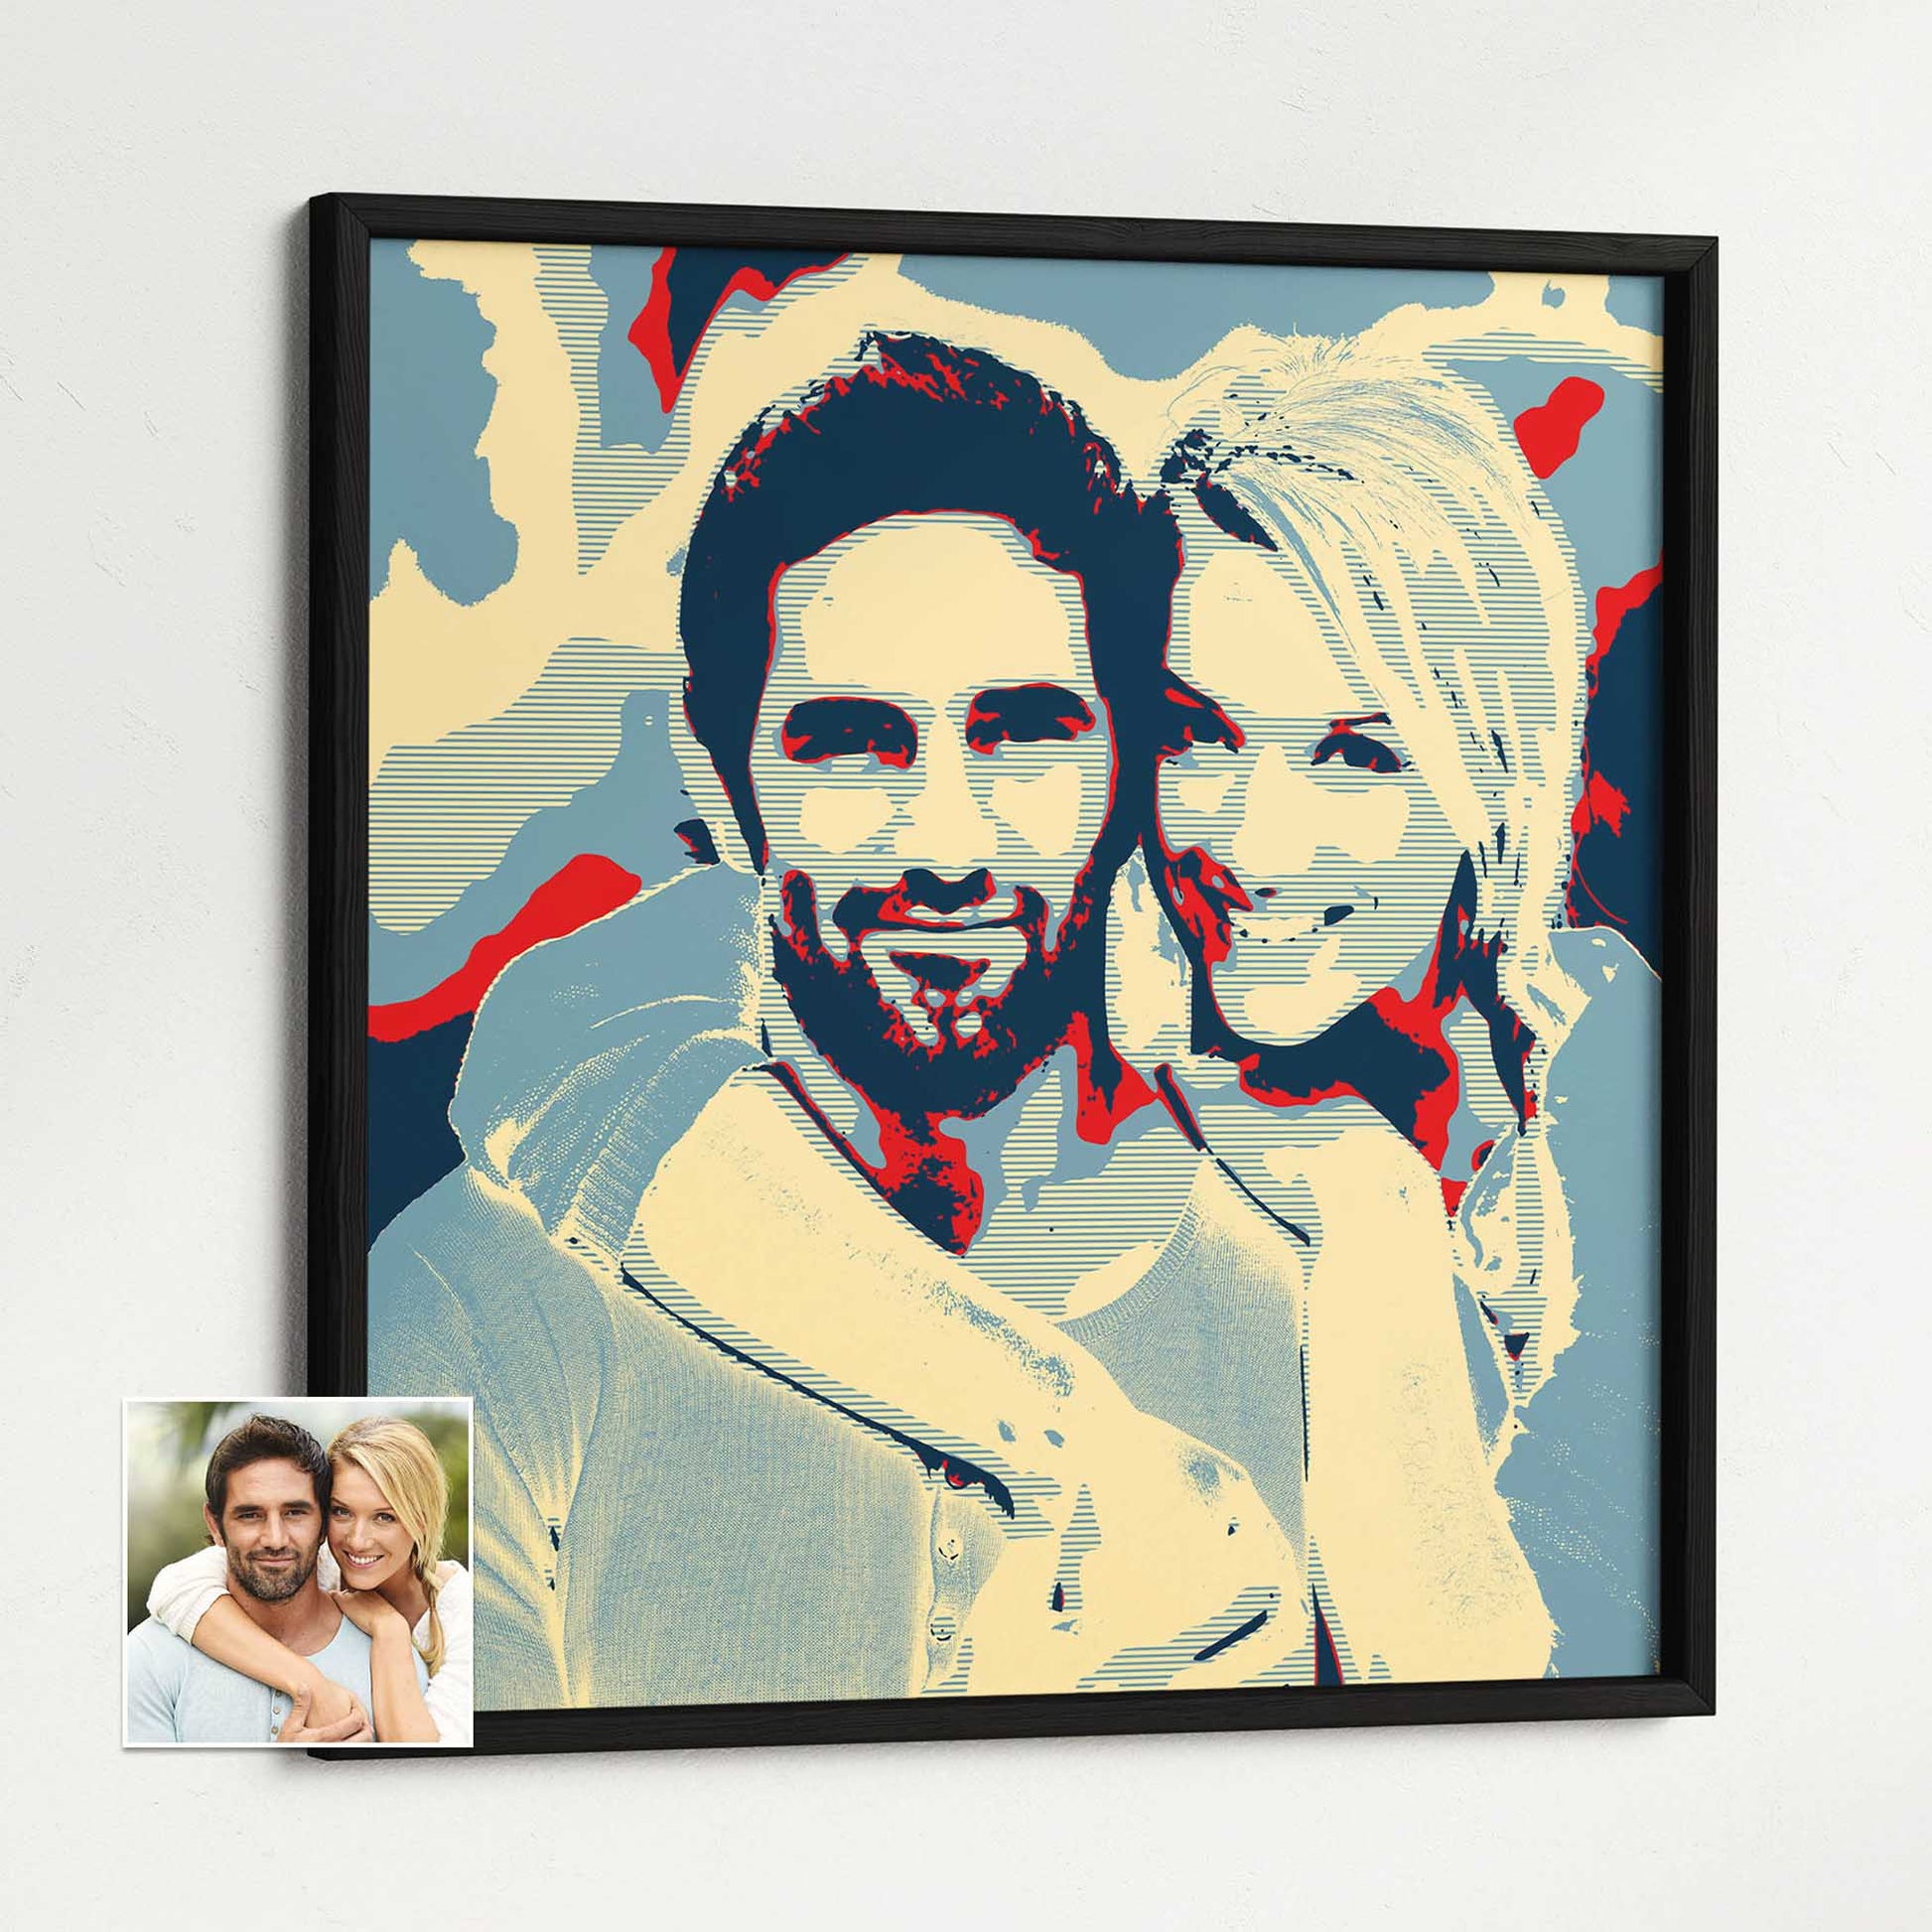 Make a statement with a Personalised Election Poster Framed Print. The unique pop art effect applied to your photo adds a vibrant and creative touch, making it a standout piece of visual art. The bright colors, combined with the sharp design